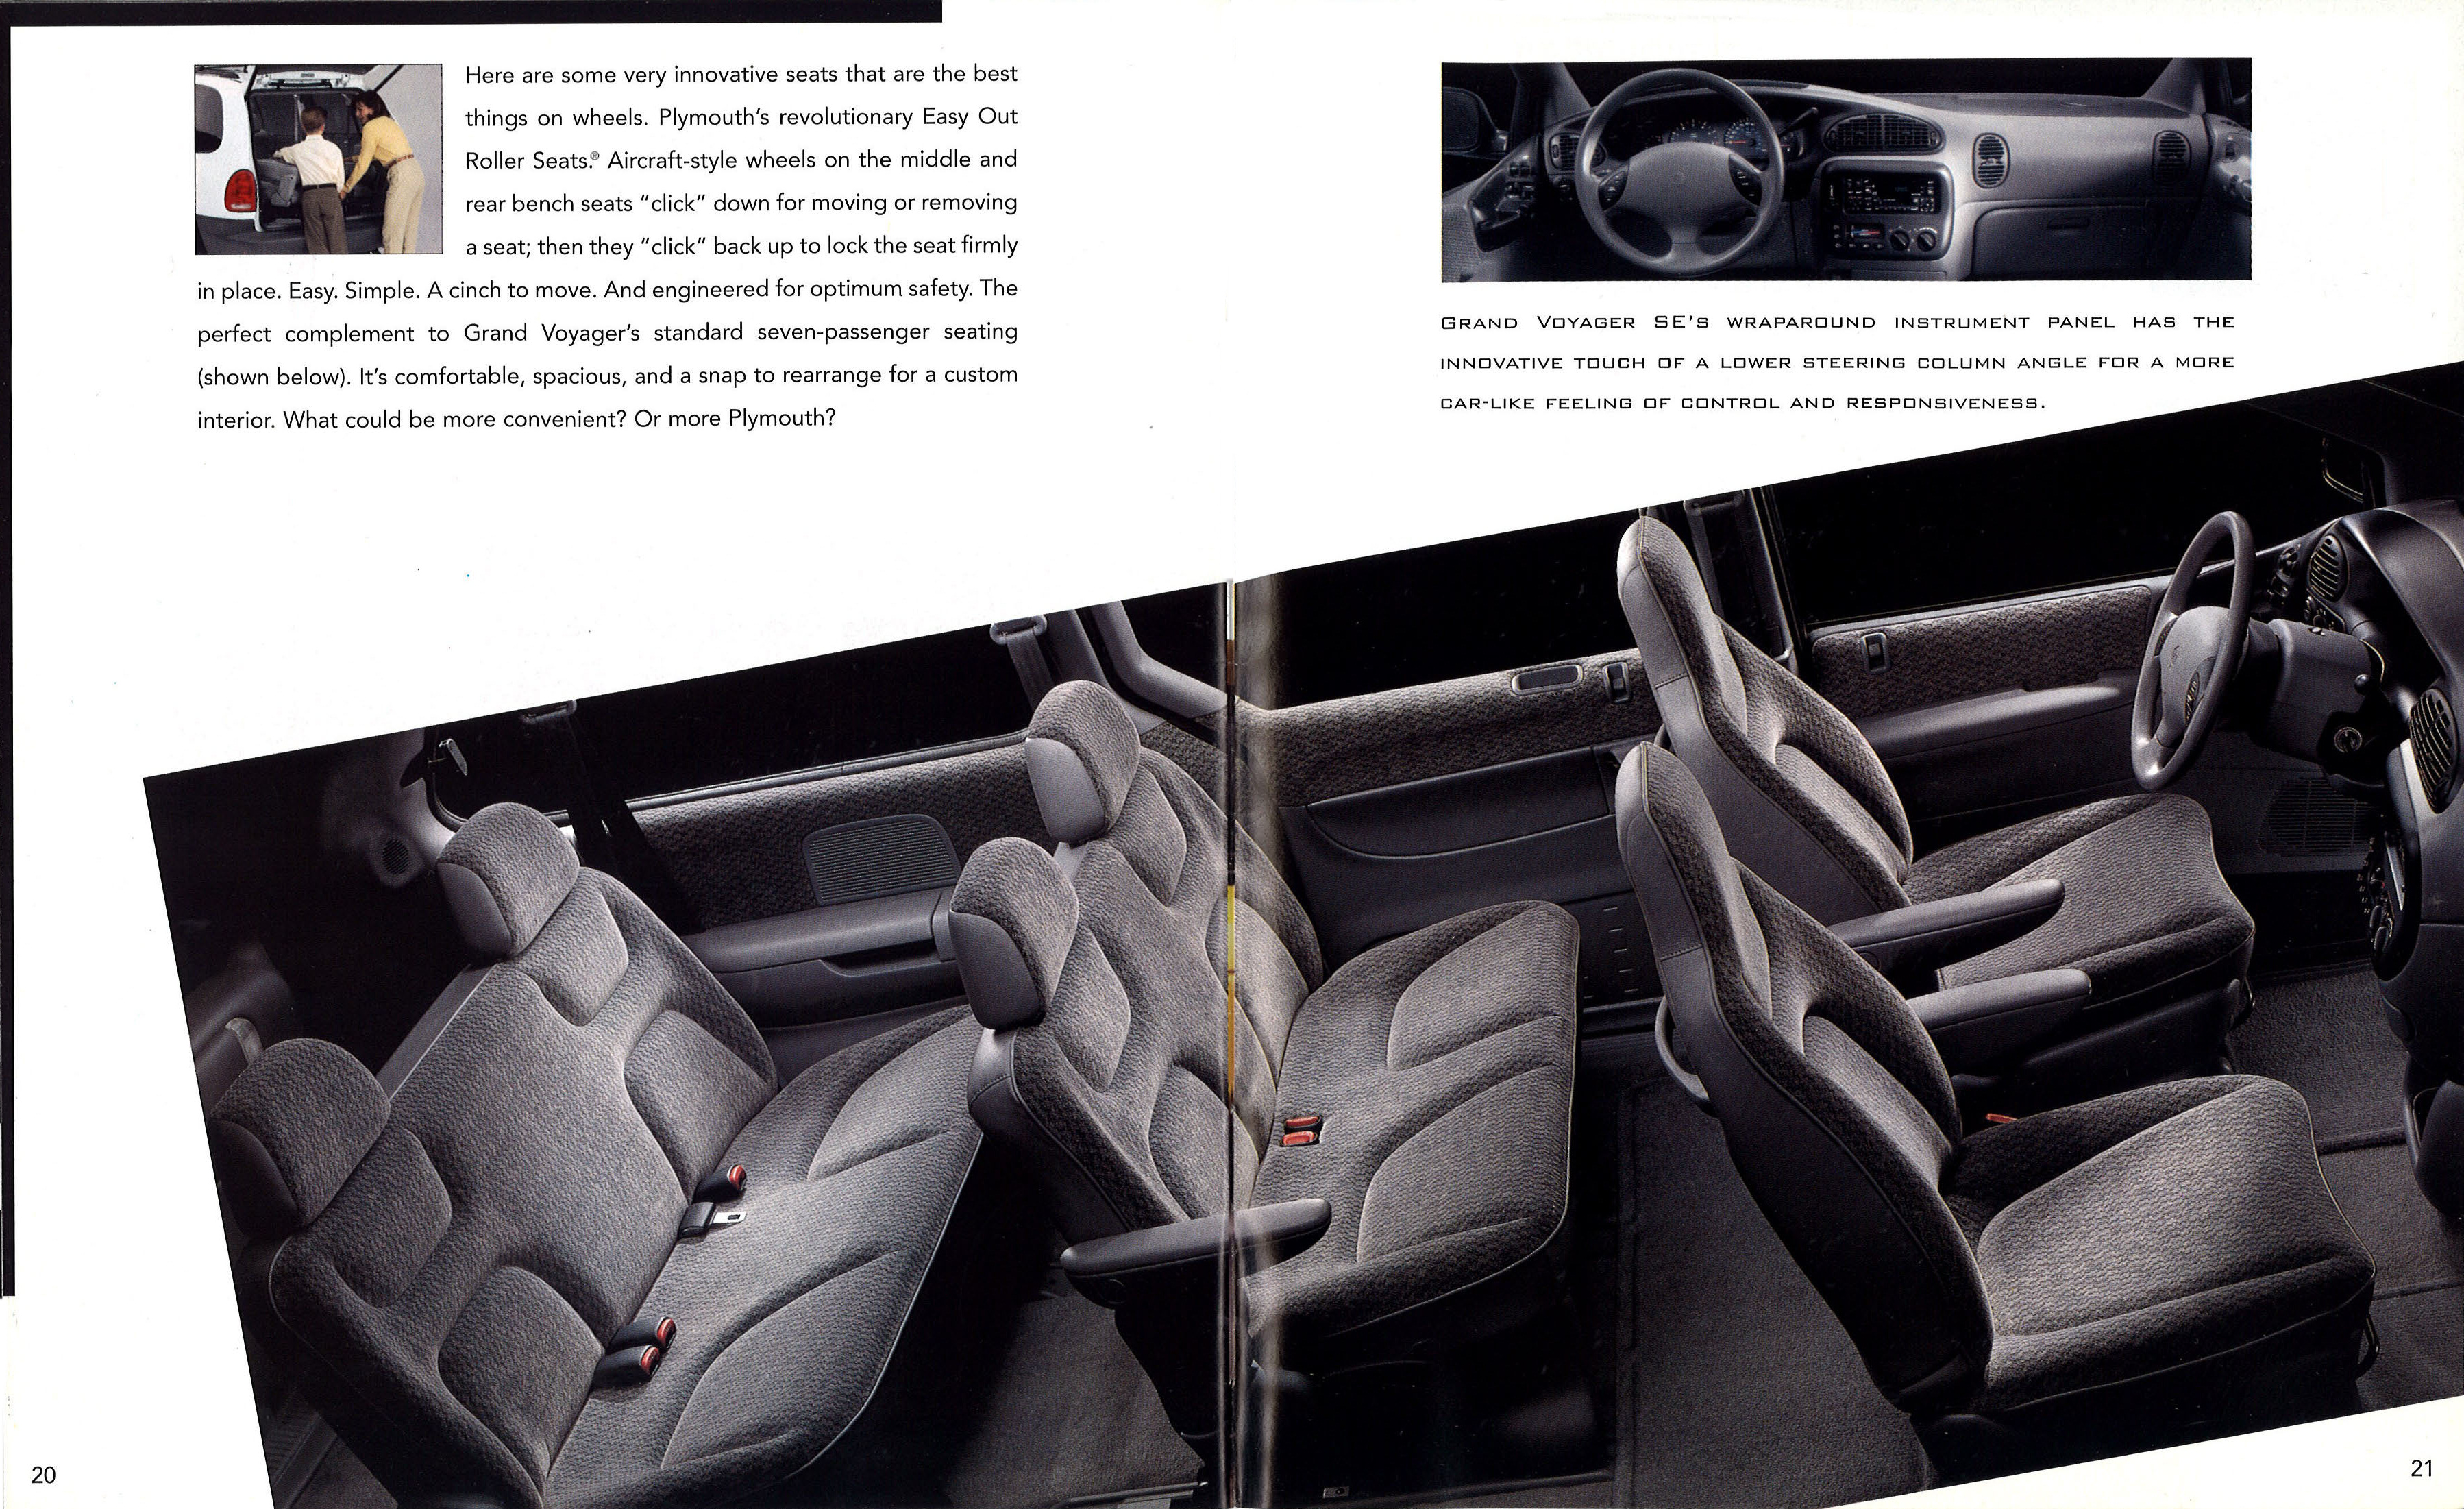 1998_Plymouth_Full_Line-20-21